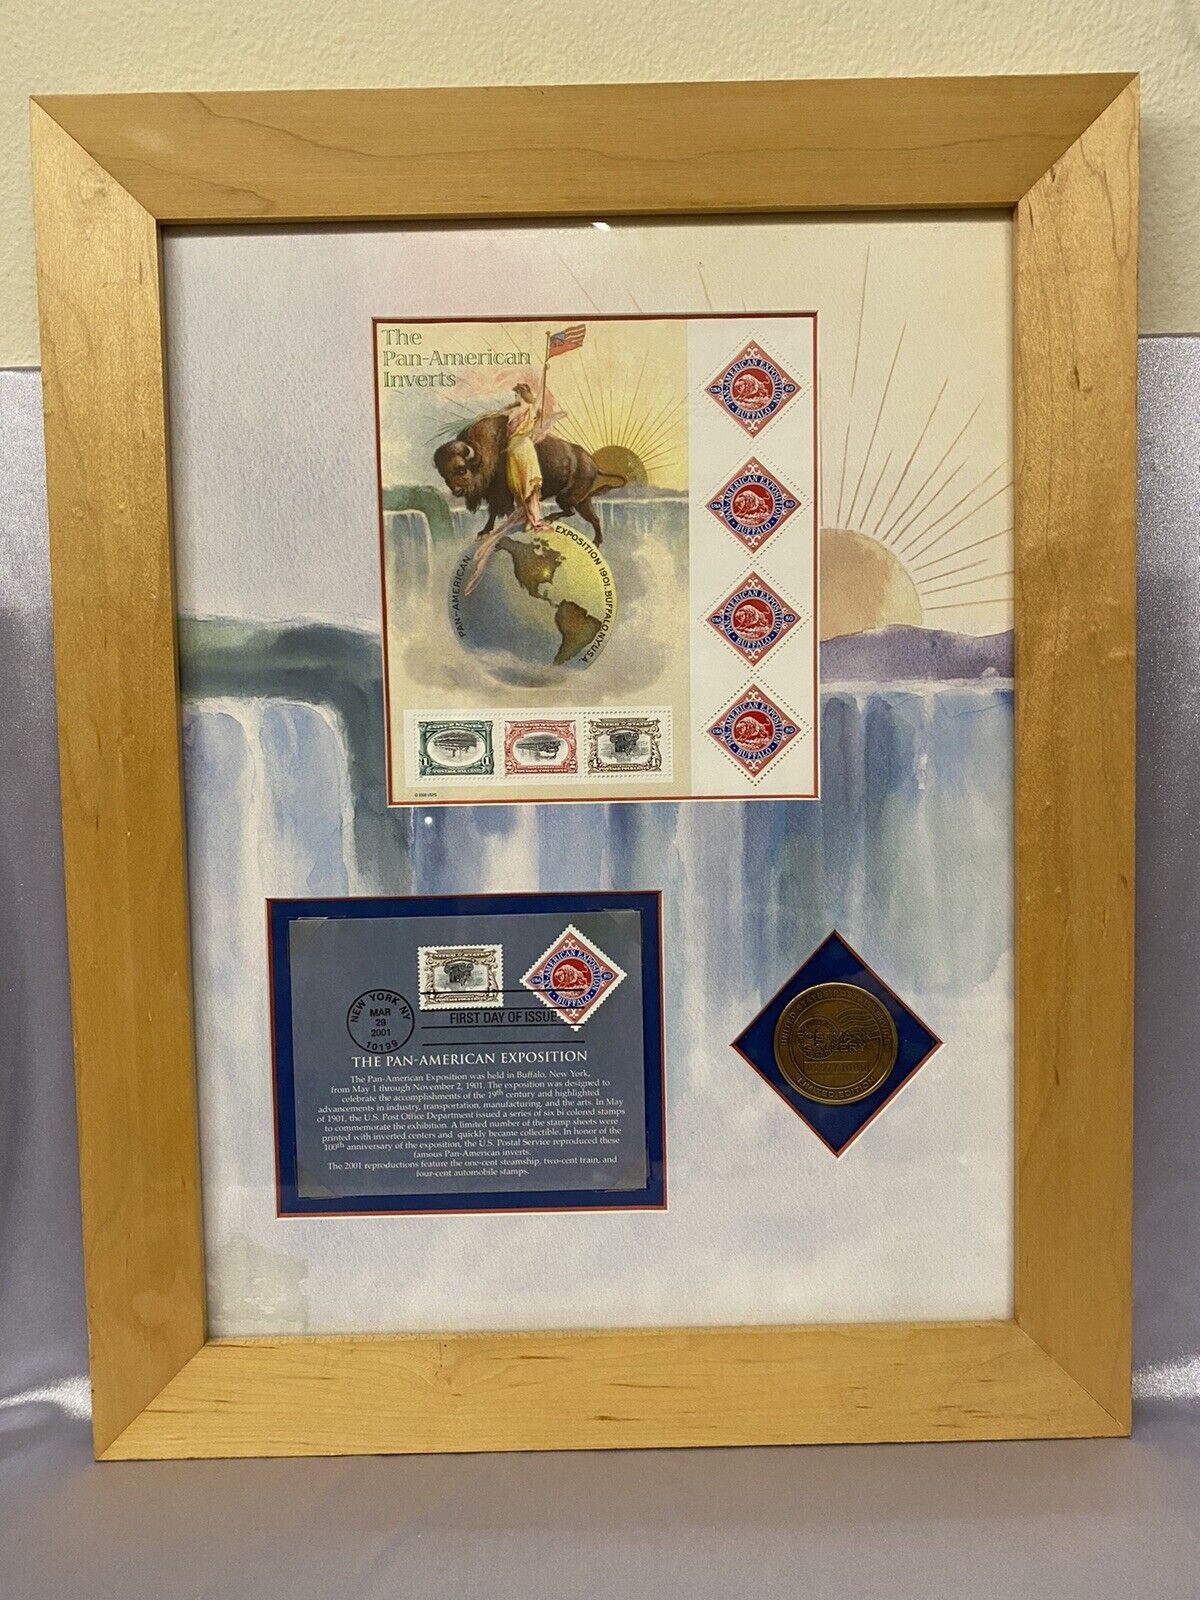 2001 Pan-American inverts-Limited Edition # 0657/1000 - 100th Annivst Exposition